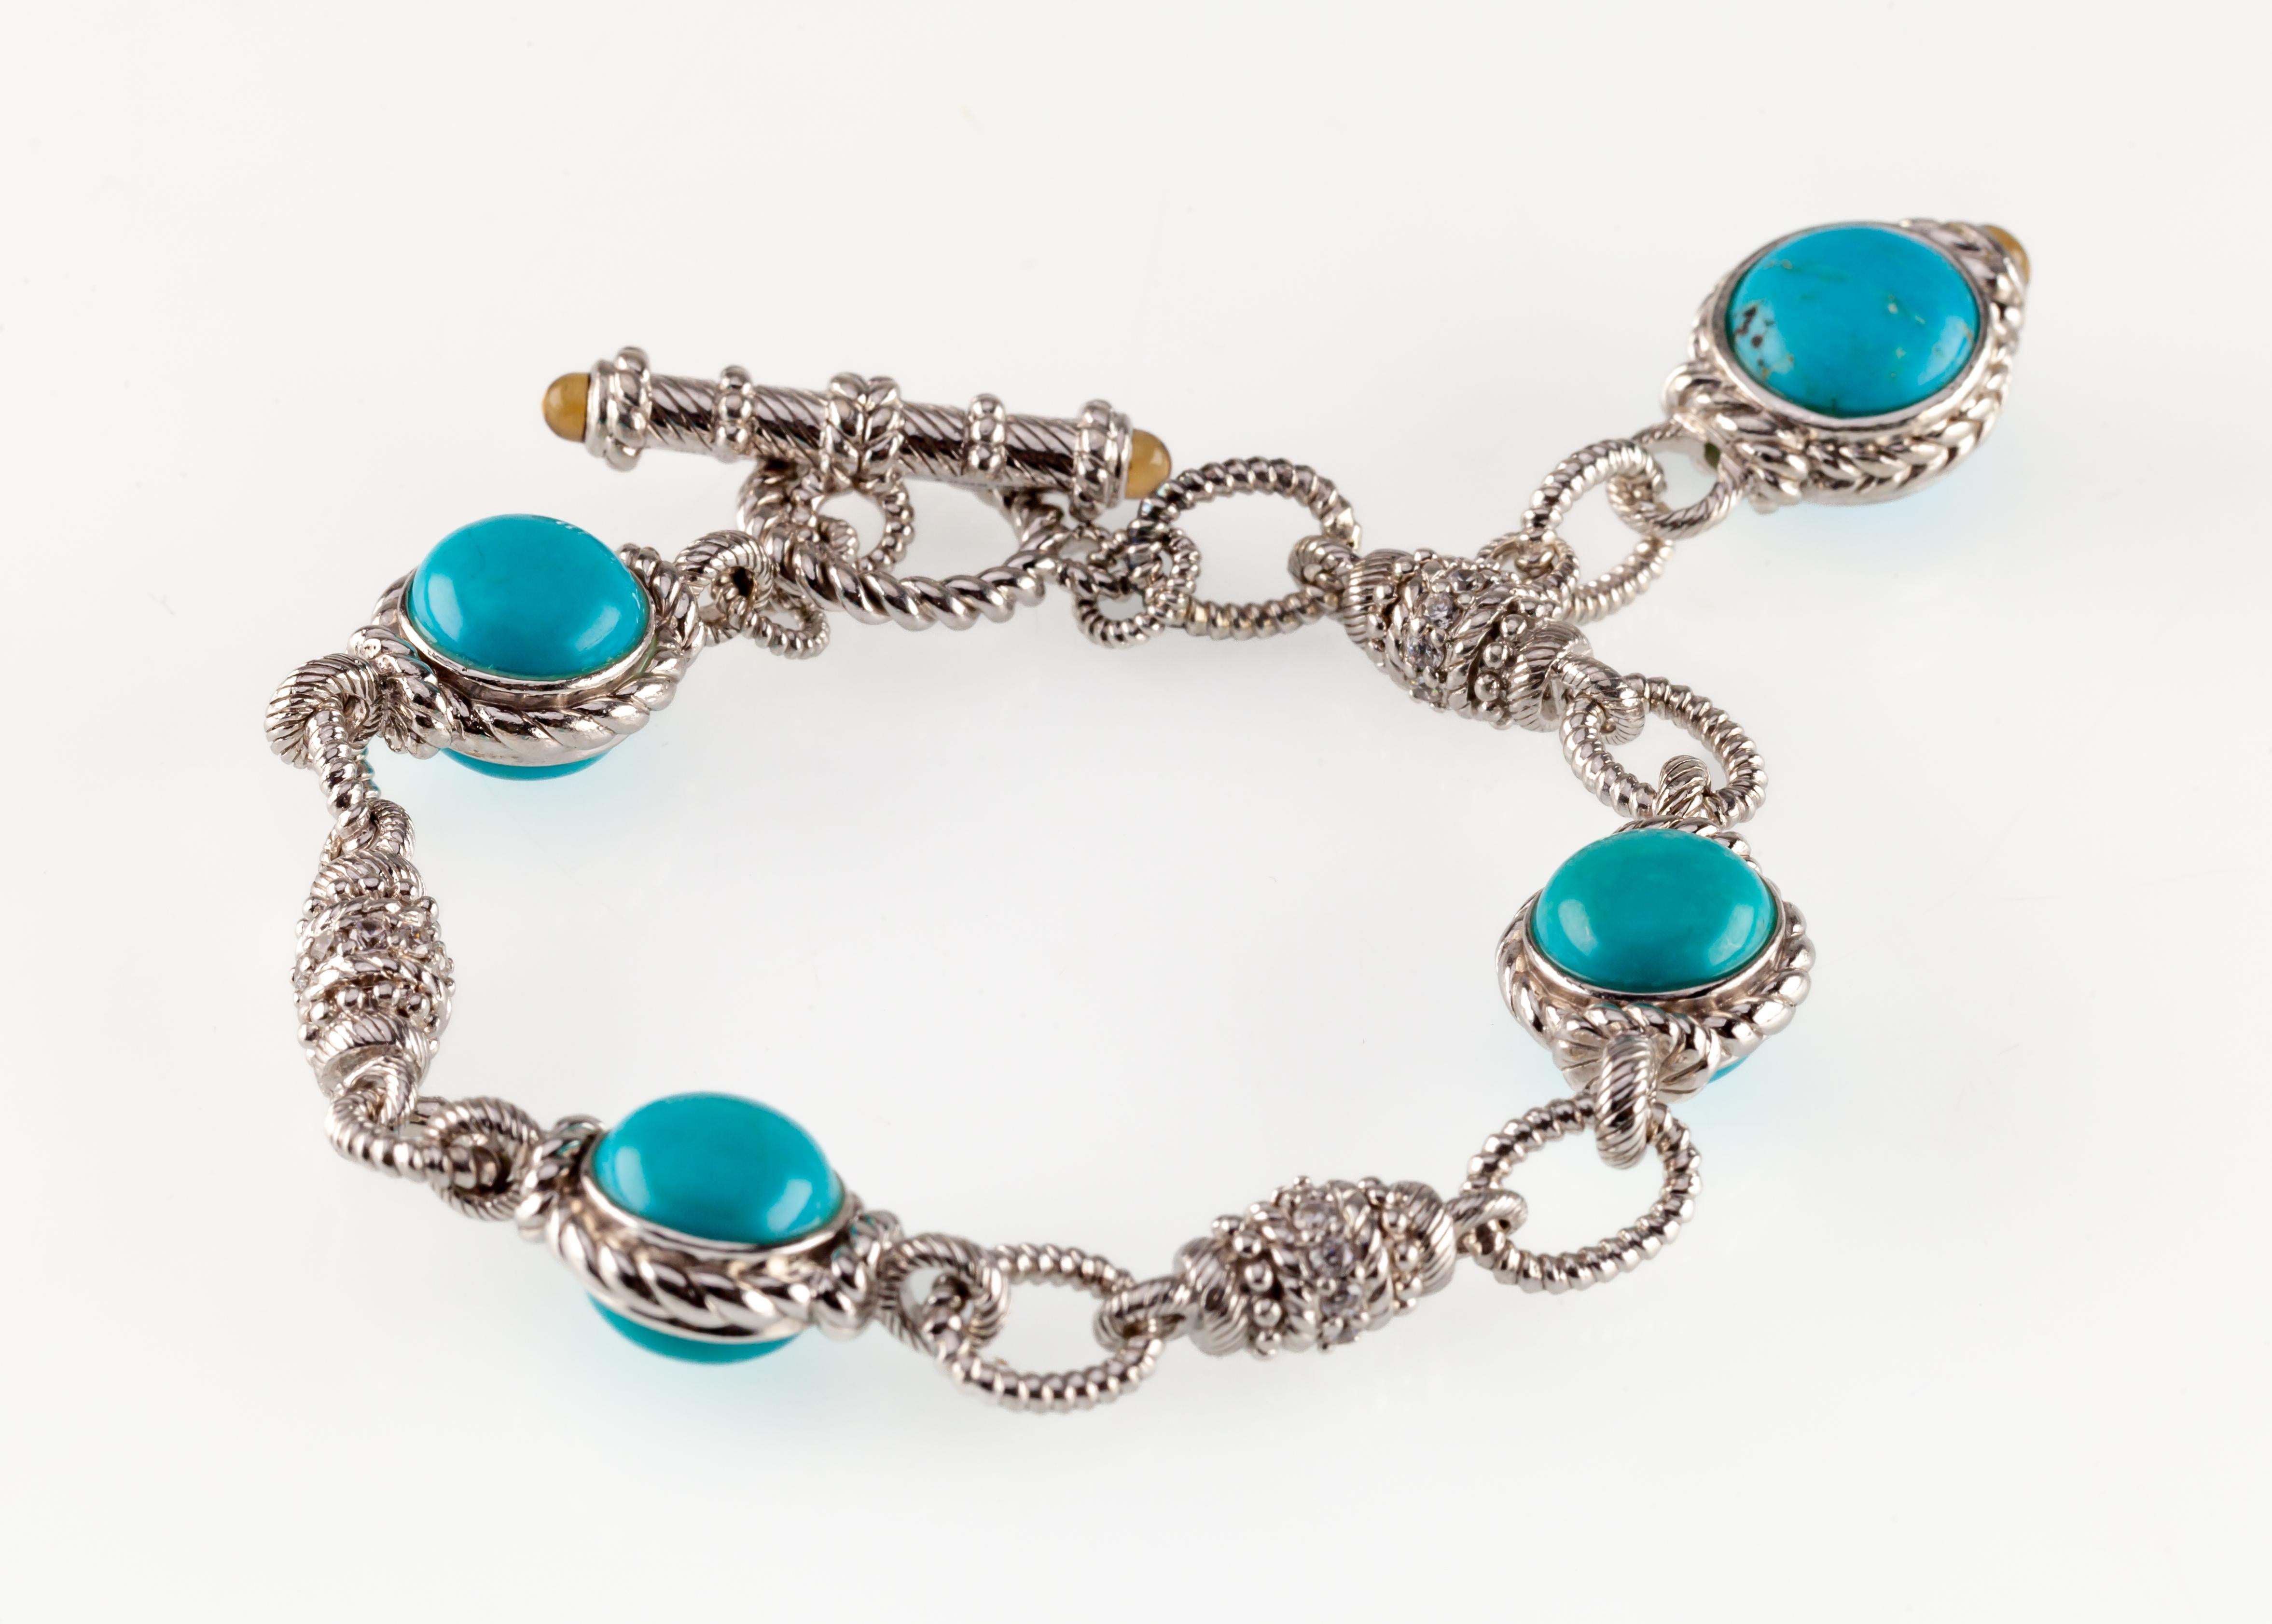 Gorgeous Bracelet by Judith Ripka
Sleeping Beauty Line
Features Round Turquouse with Diamonique Accents
Total Length = 7